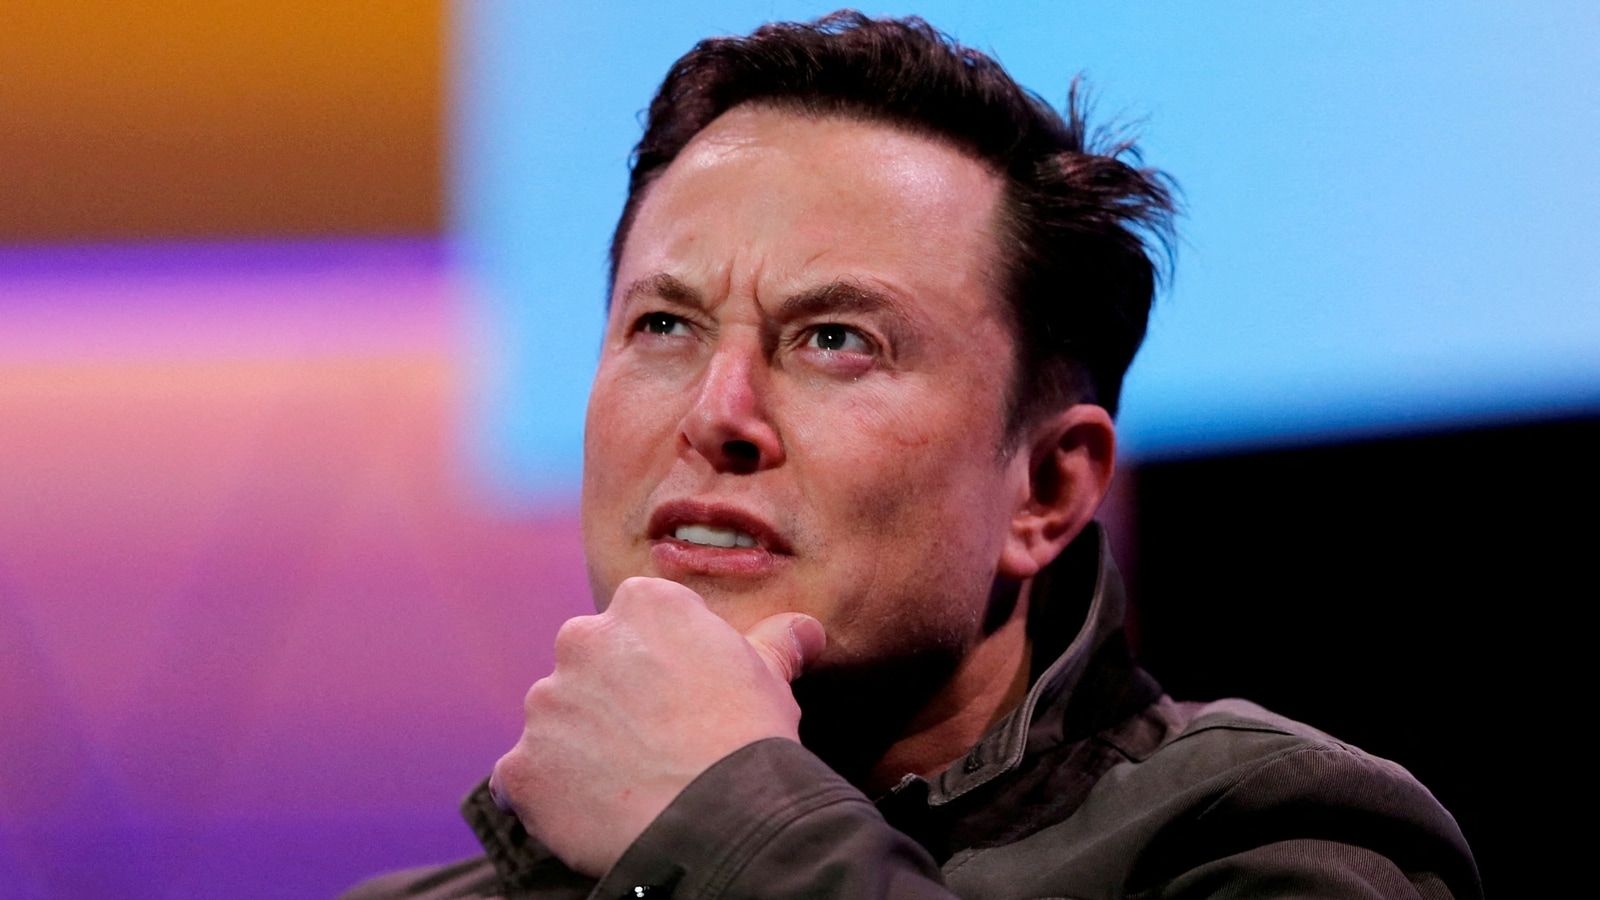 ‘I made an offer’: Musk bids $43.4 bn for Twitter; company says ‘will review’